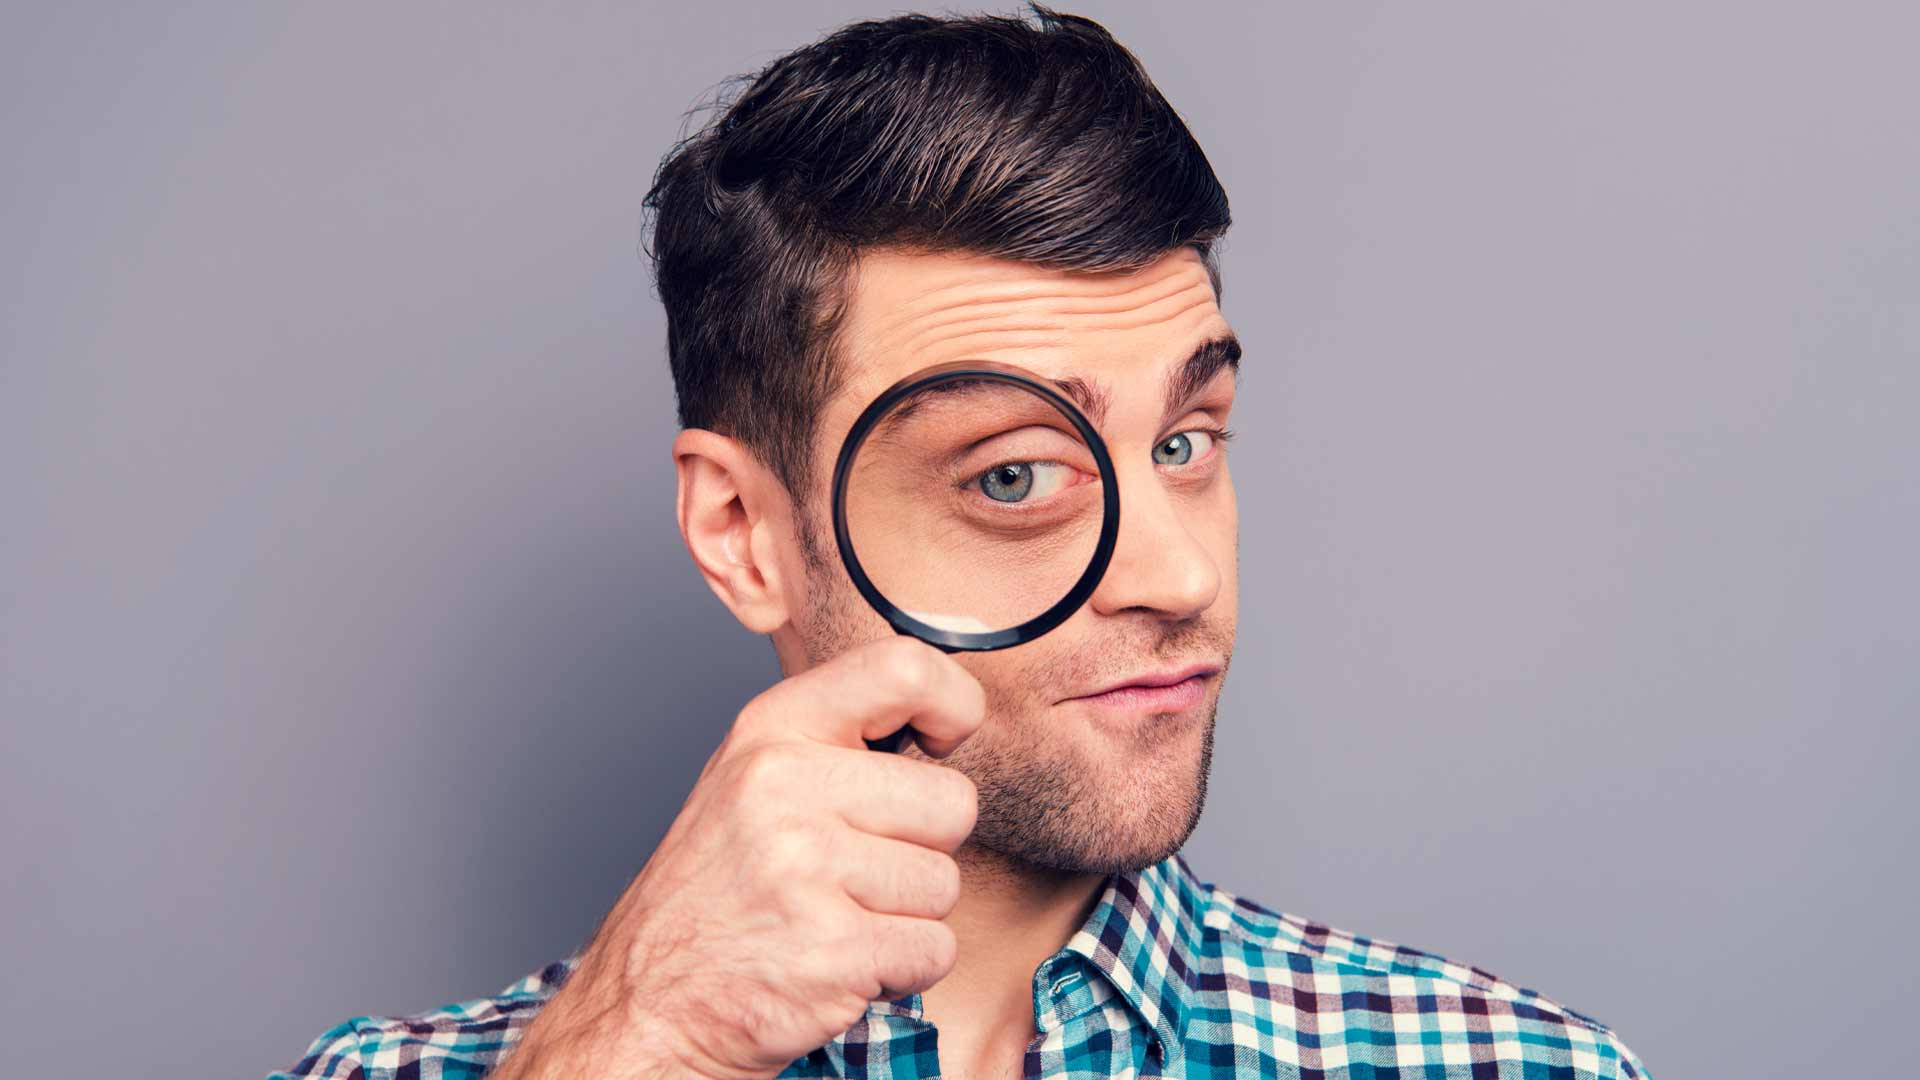 A man holding a magnifying glass up to his eye.